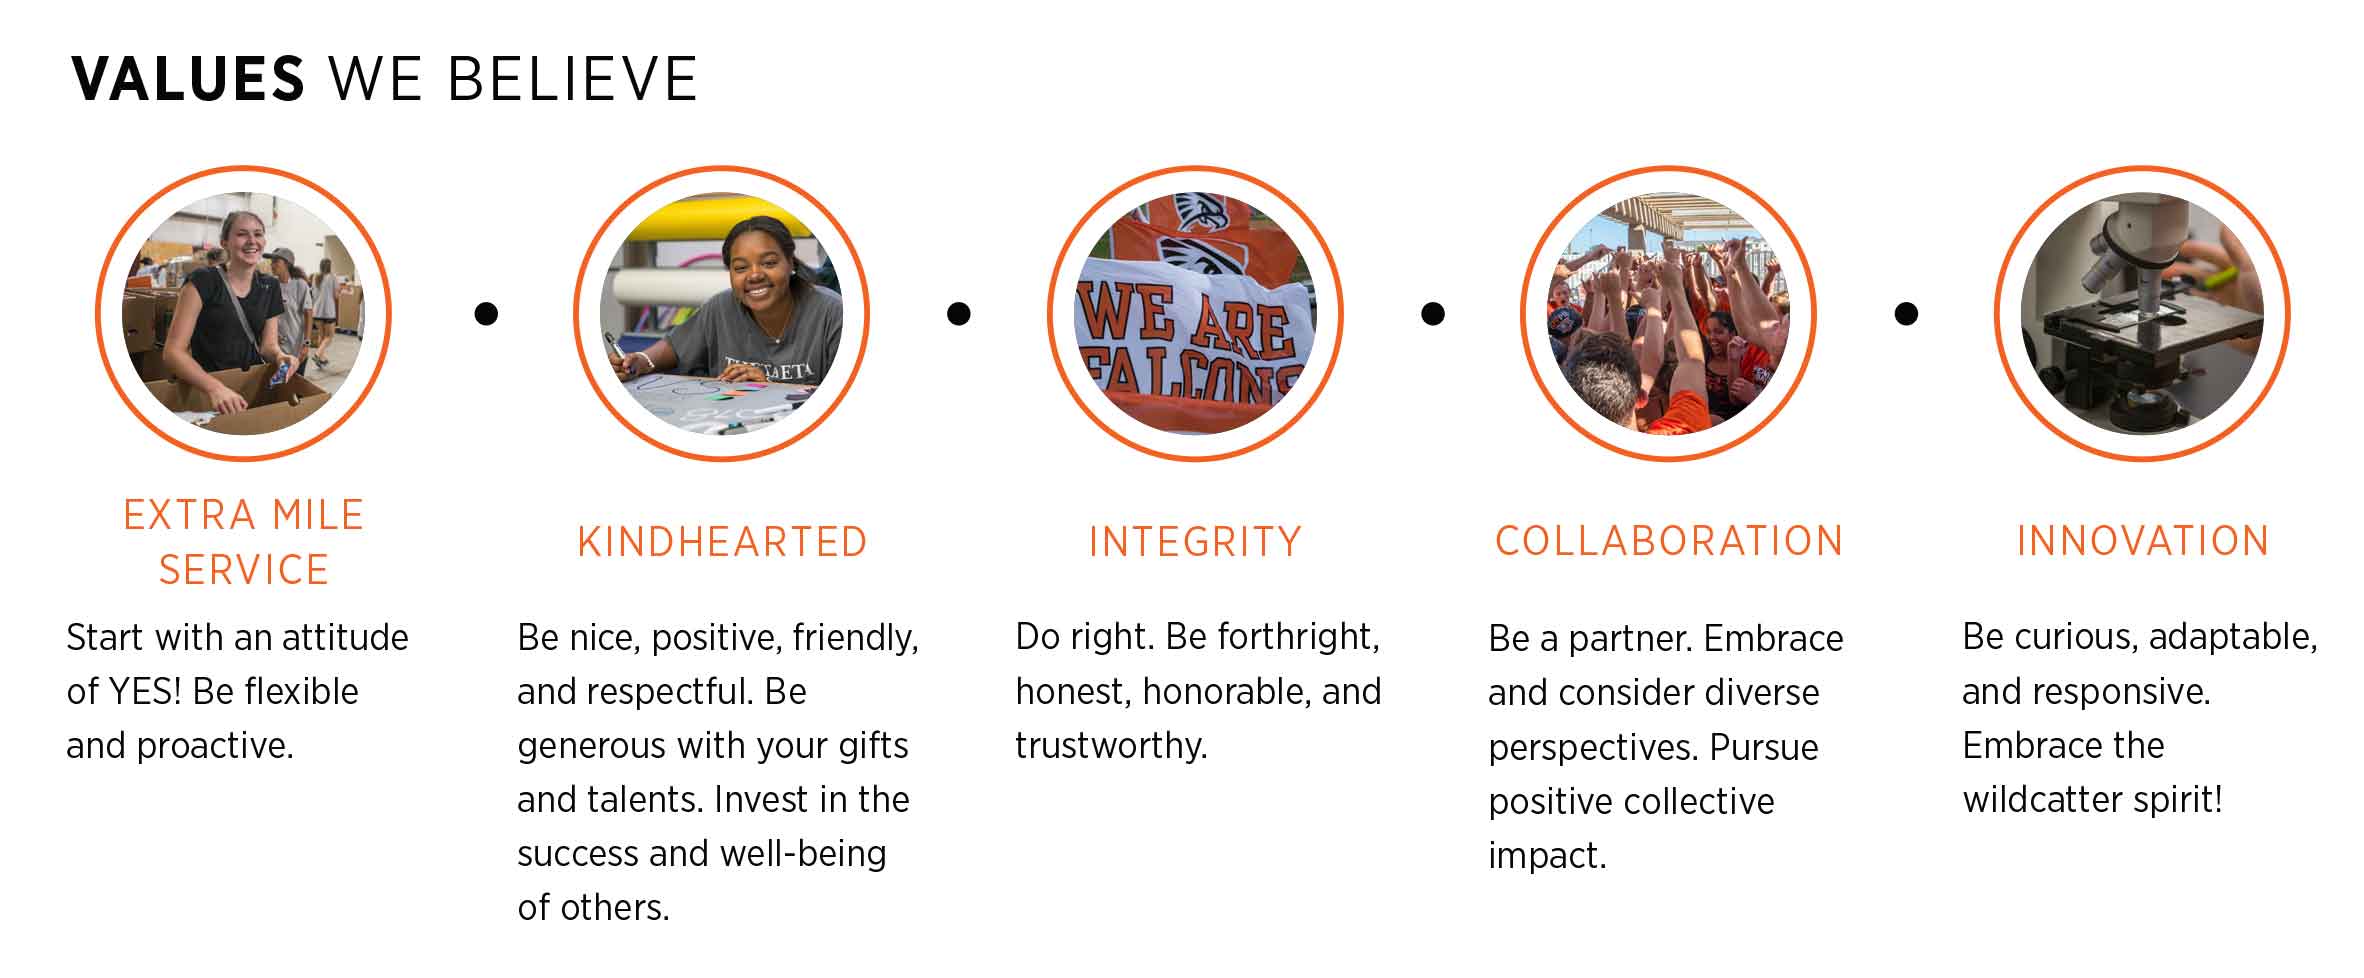 Strategic Plan Values : Extra Mile Service, Kindhearted, Integrity, Collaboration, Innovation